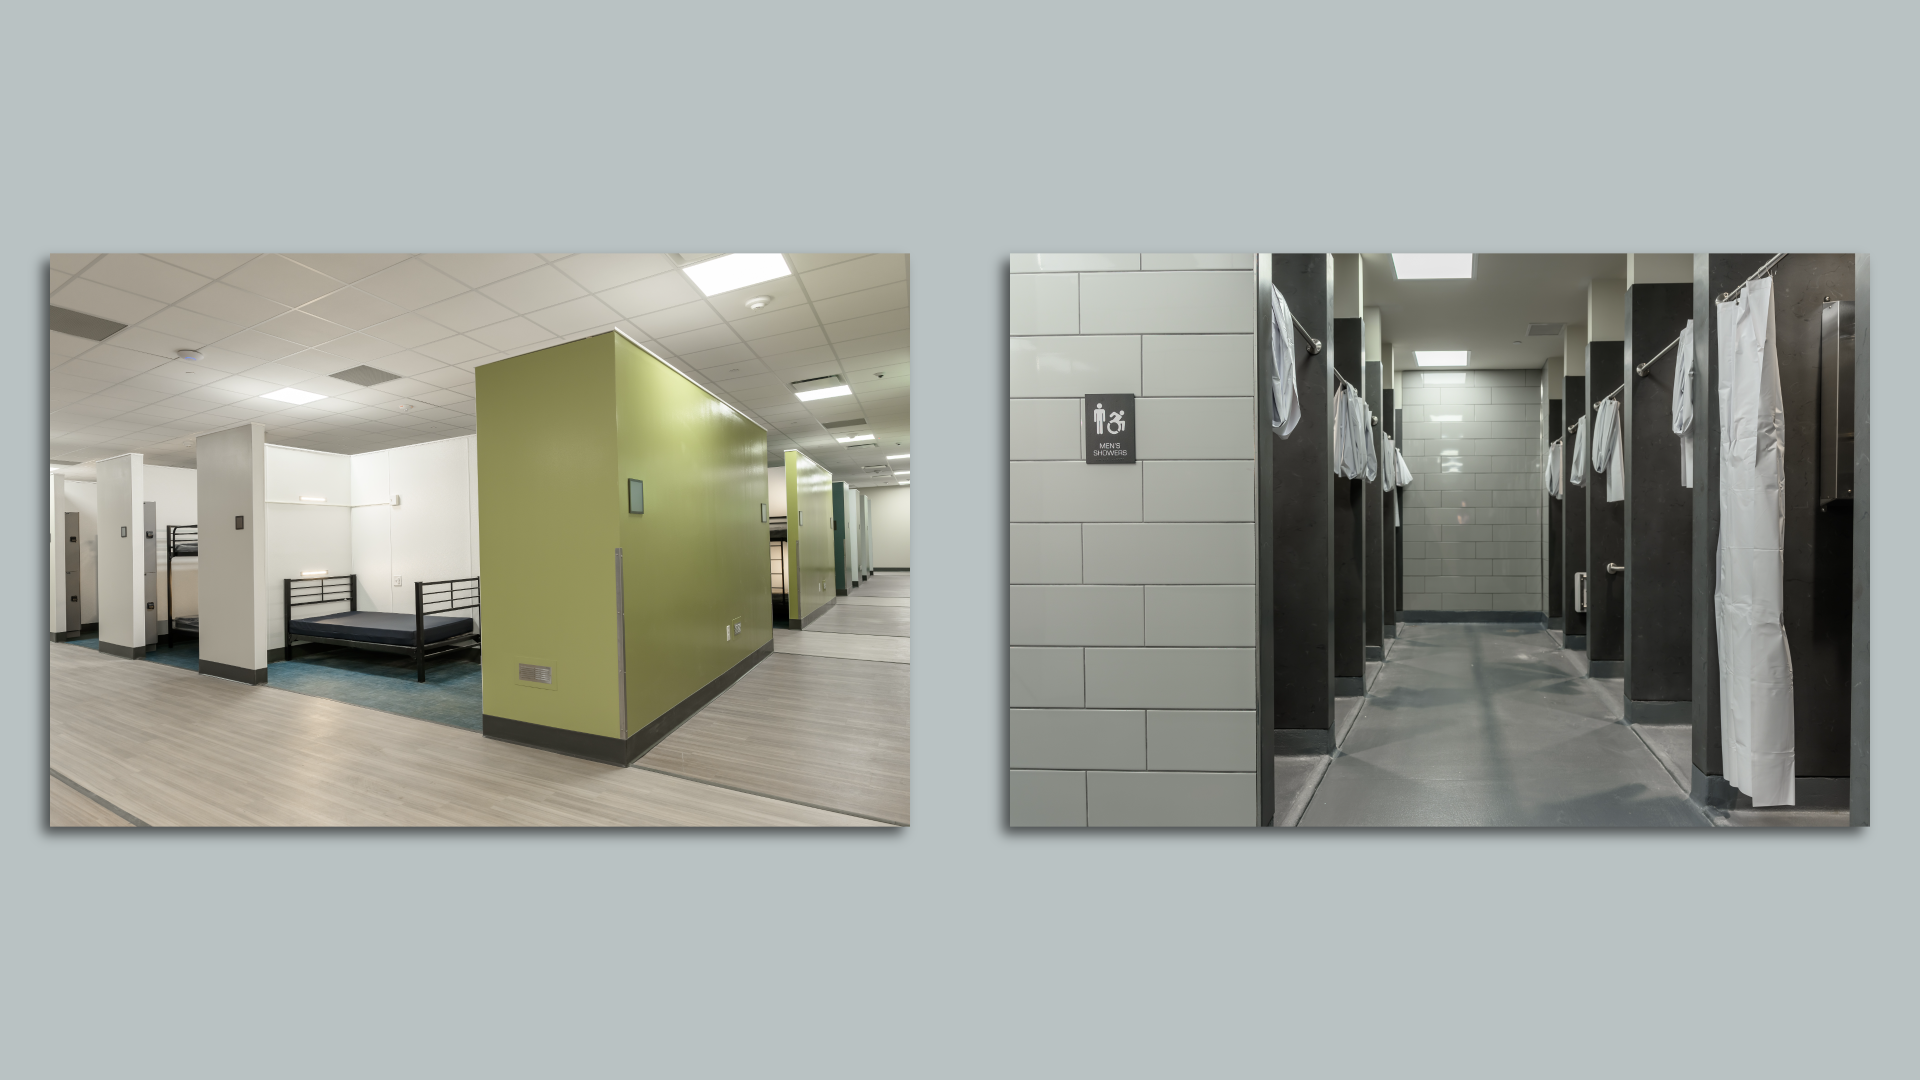 Side by side photos of a homeless shelter interior renovation: sleeping area (L) and showers (R)